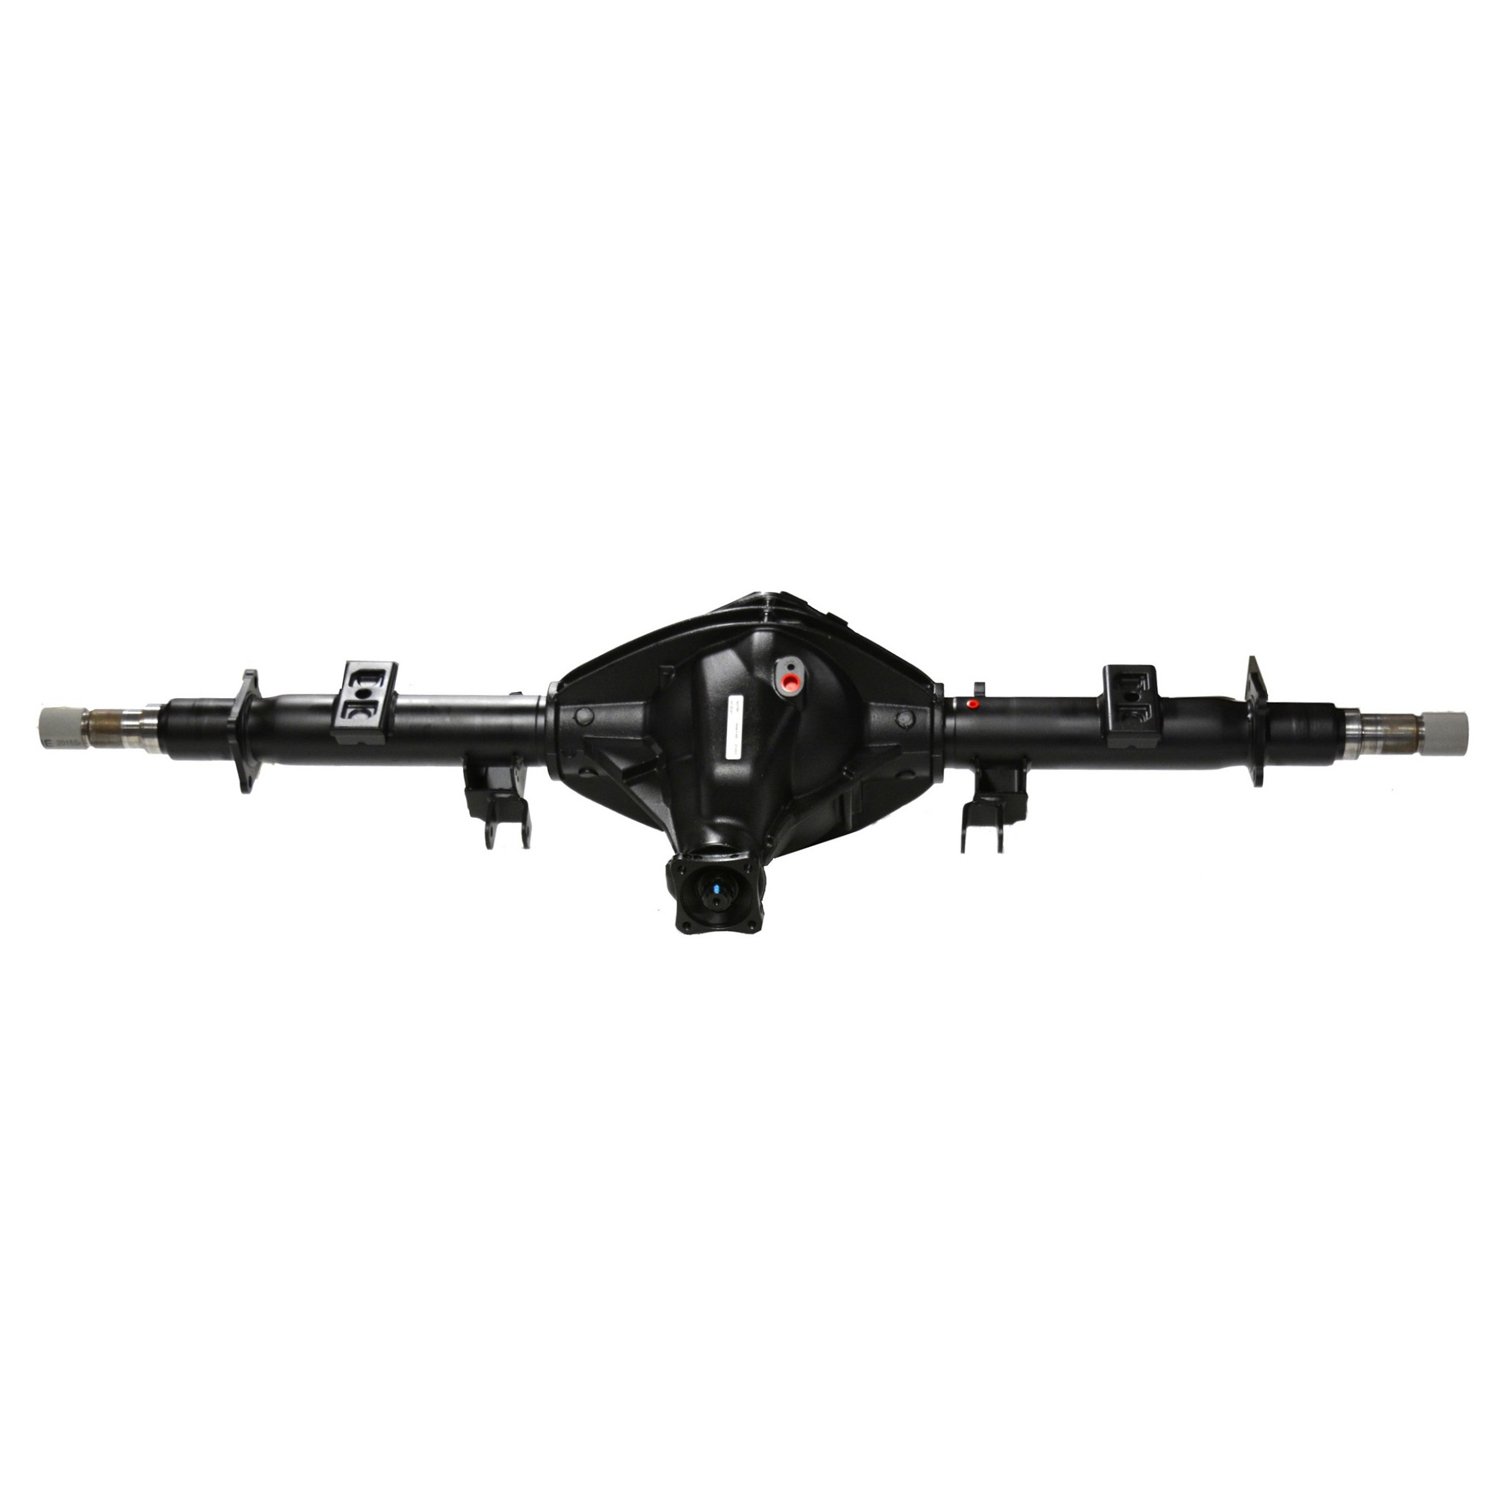 Remanufactured 11.5" AXLE ASSY '06-'08 RAM DRW 3500 ('07-'08 EXC CAB-CHASSIS) 3.73, 2WD, POSI